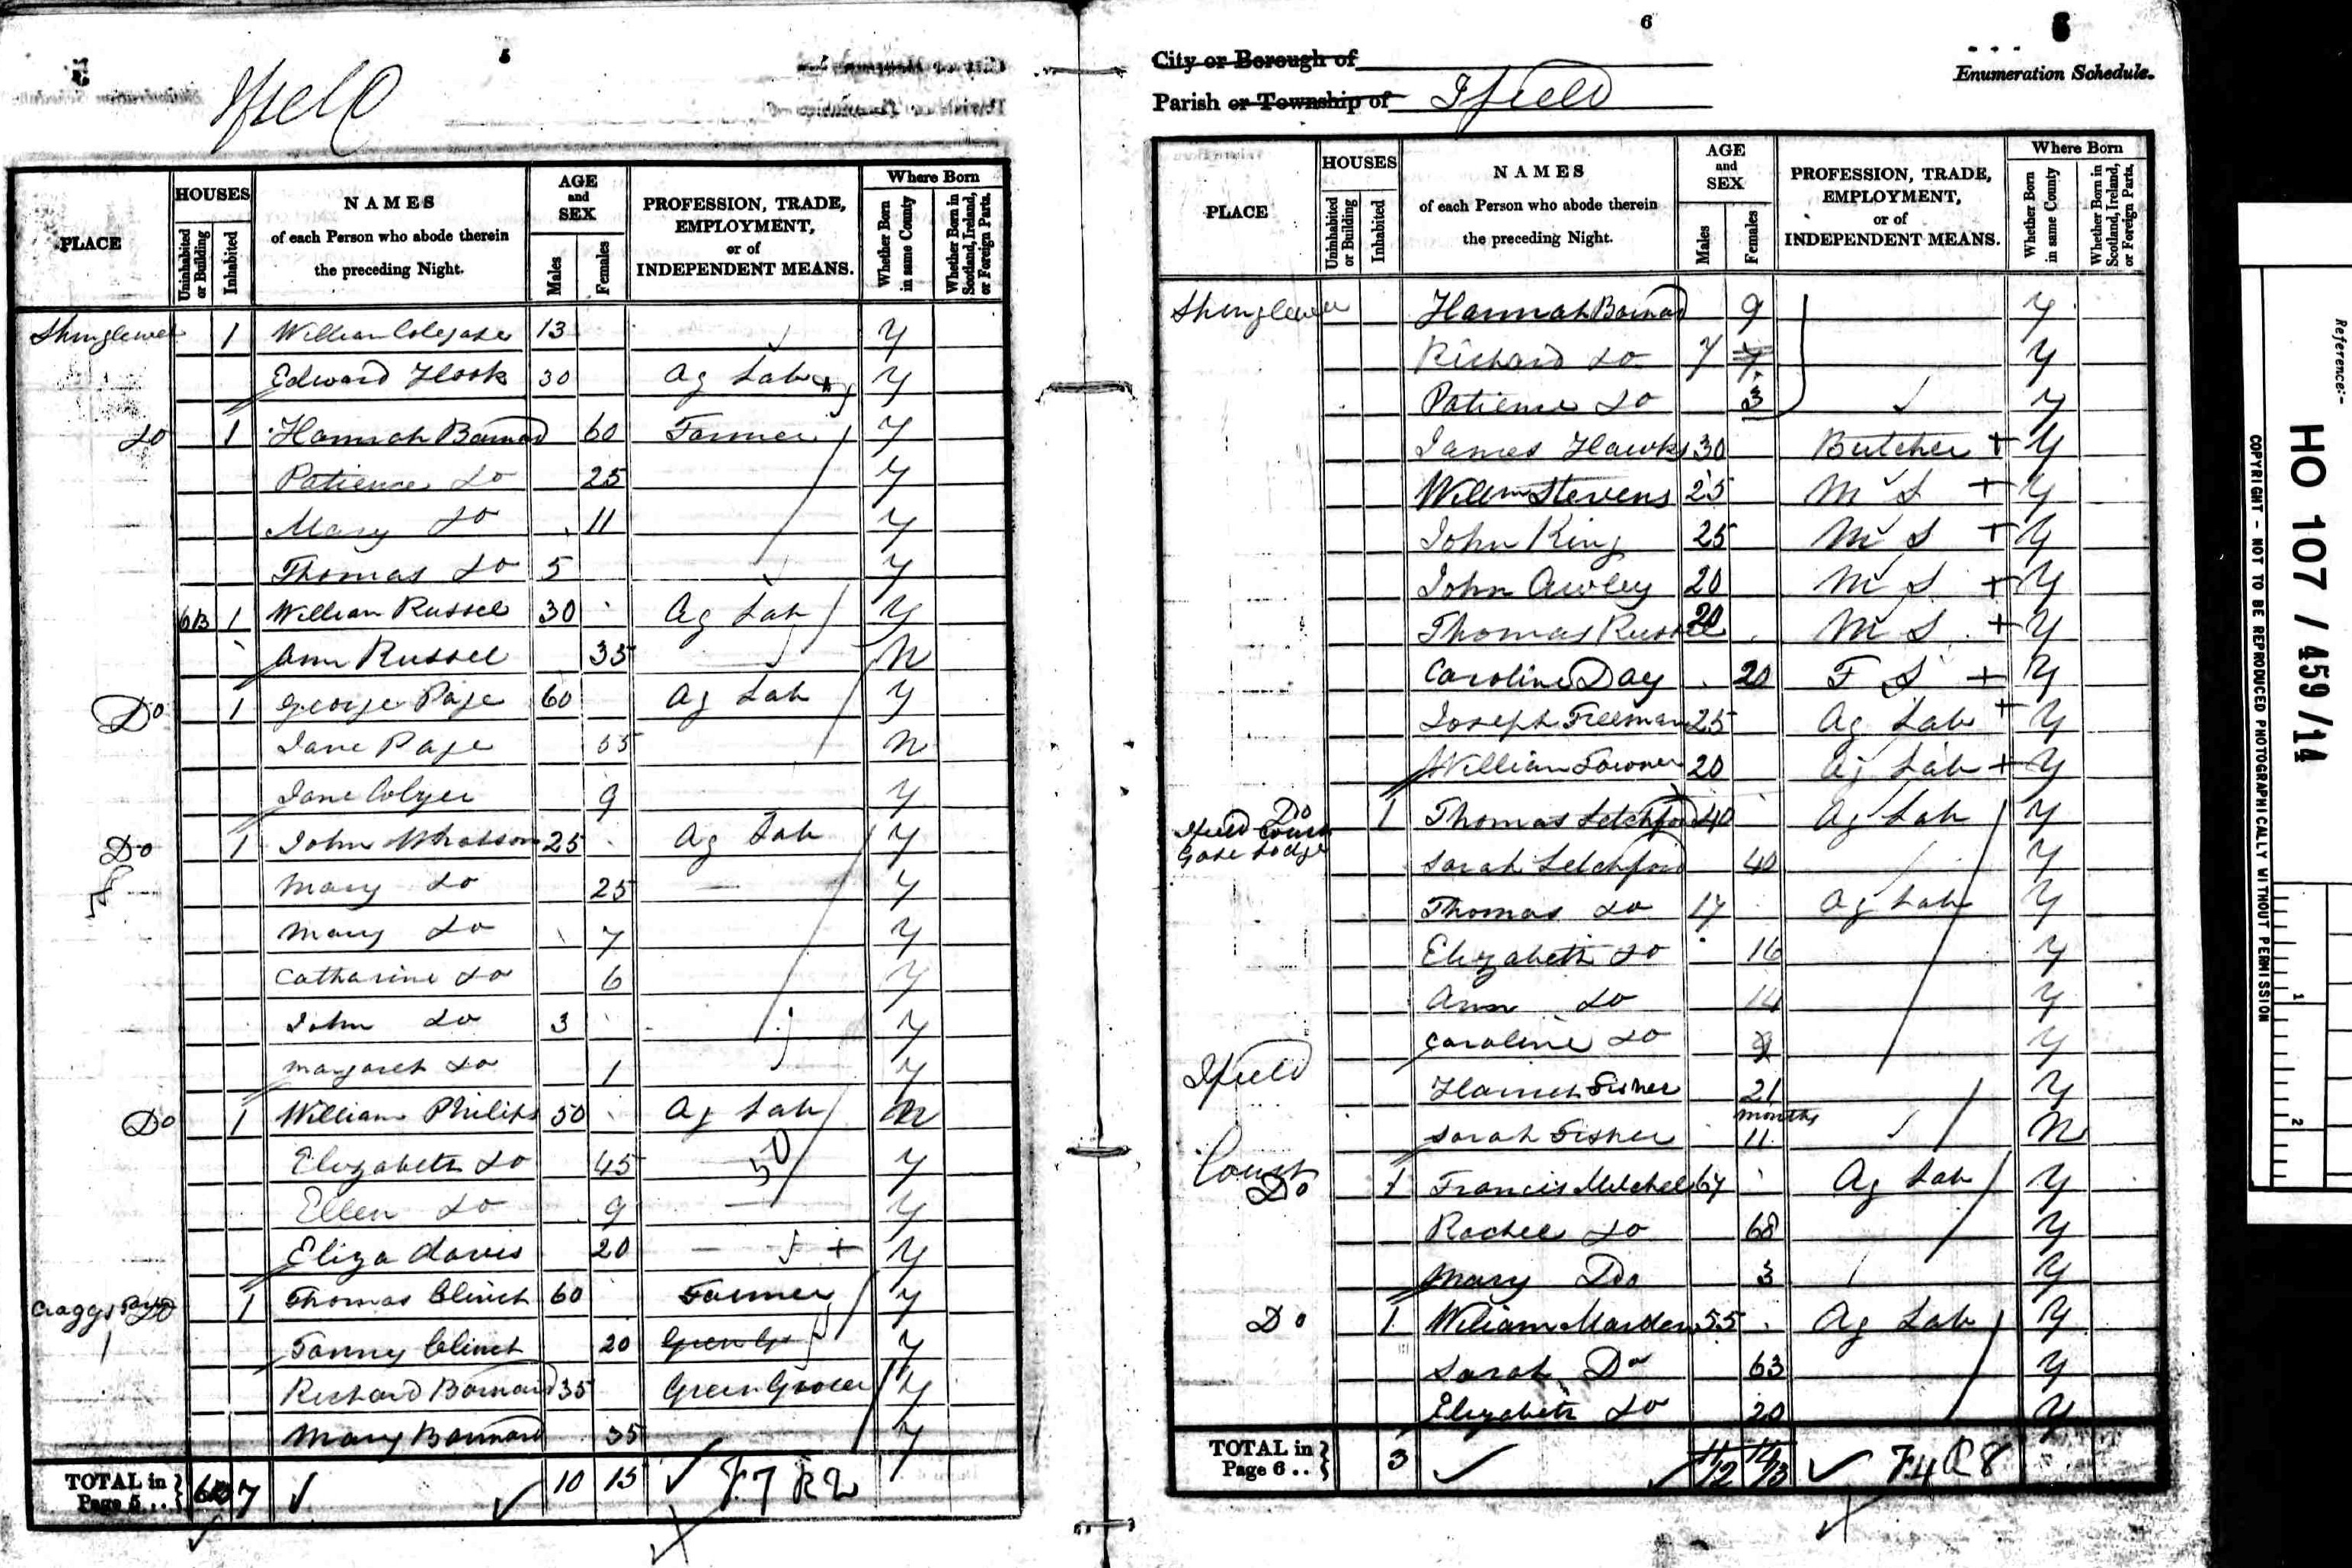  - 1473_1_thomas_and_fanny_clinch__hannah_barnard_and_children_shinglewell_ifield_1841census-0459_0379(2)